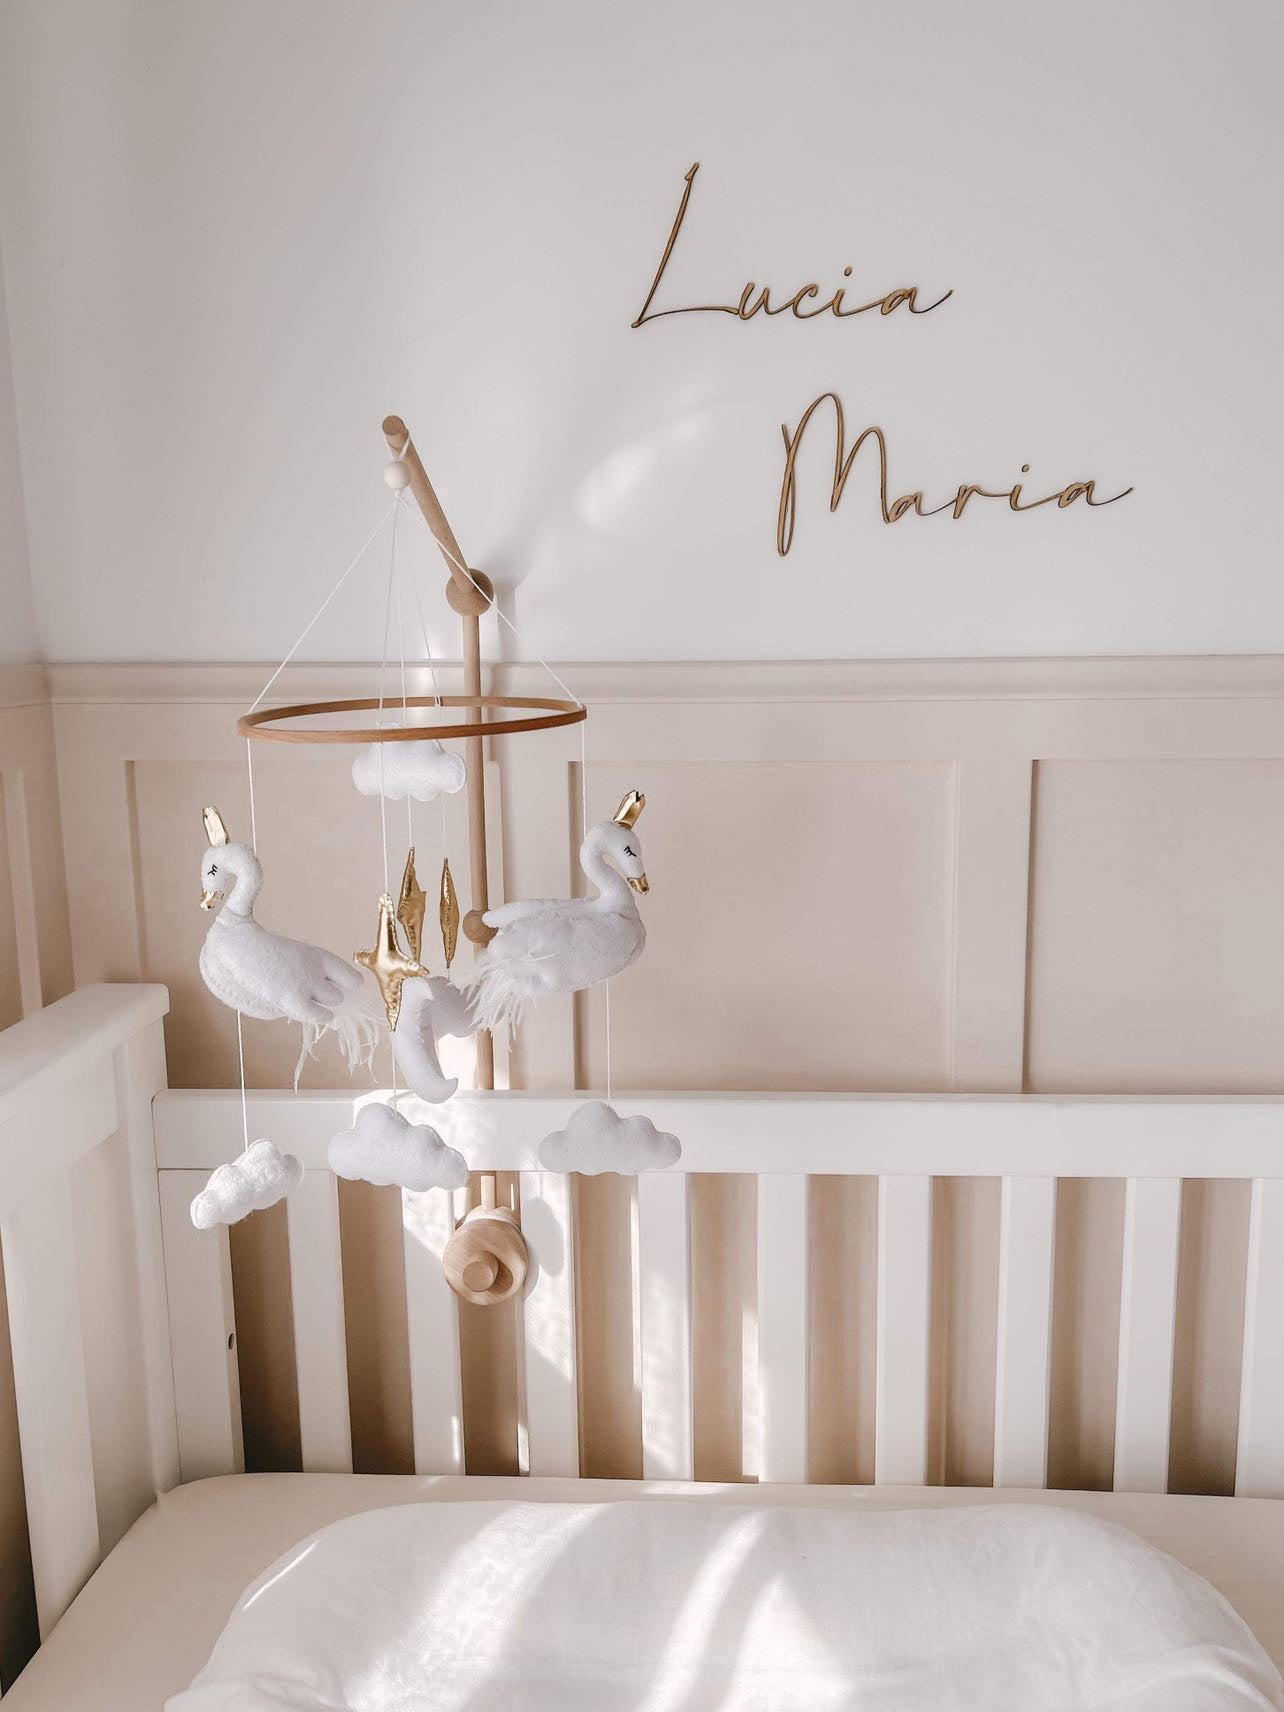 Image of a charming baby nursery room adorned with a delicate swan-themed mobile. The room features soft pastel colors, plush toys, and a cozy crib, creating a serene and inviting atmosphere for a baby.